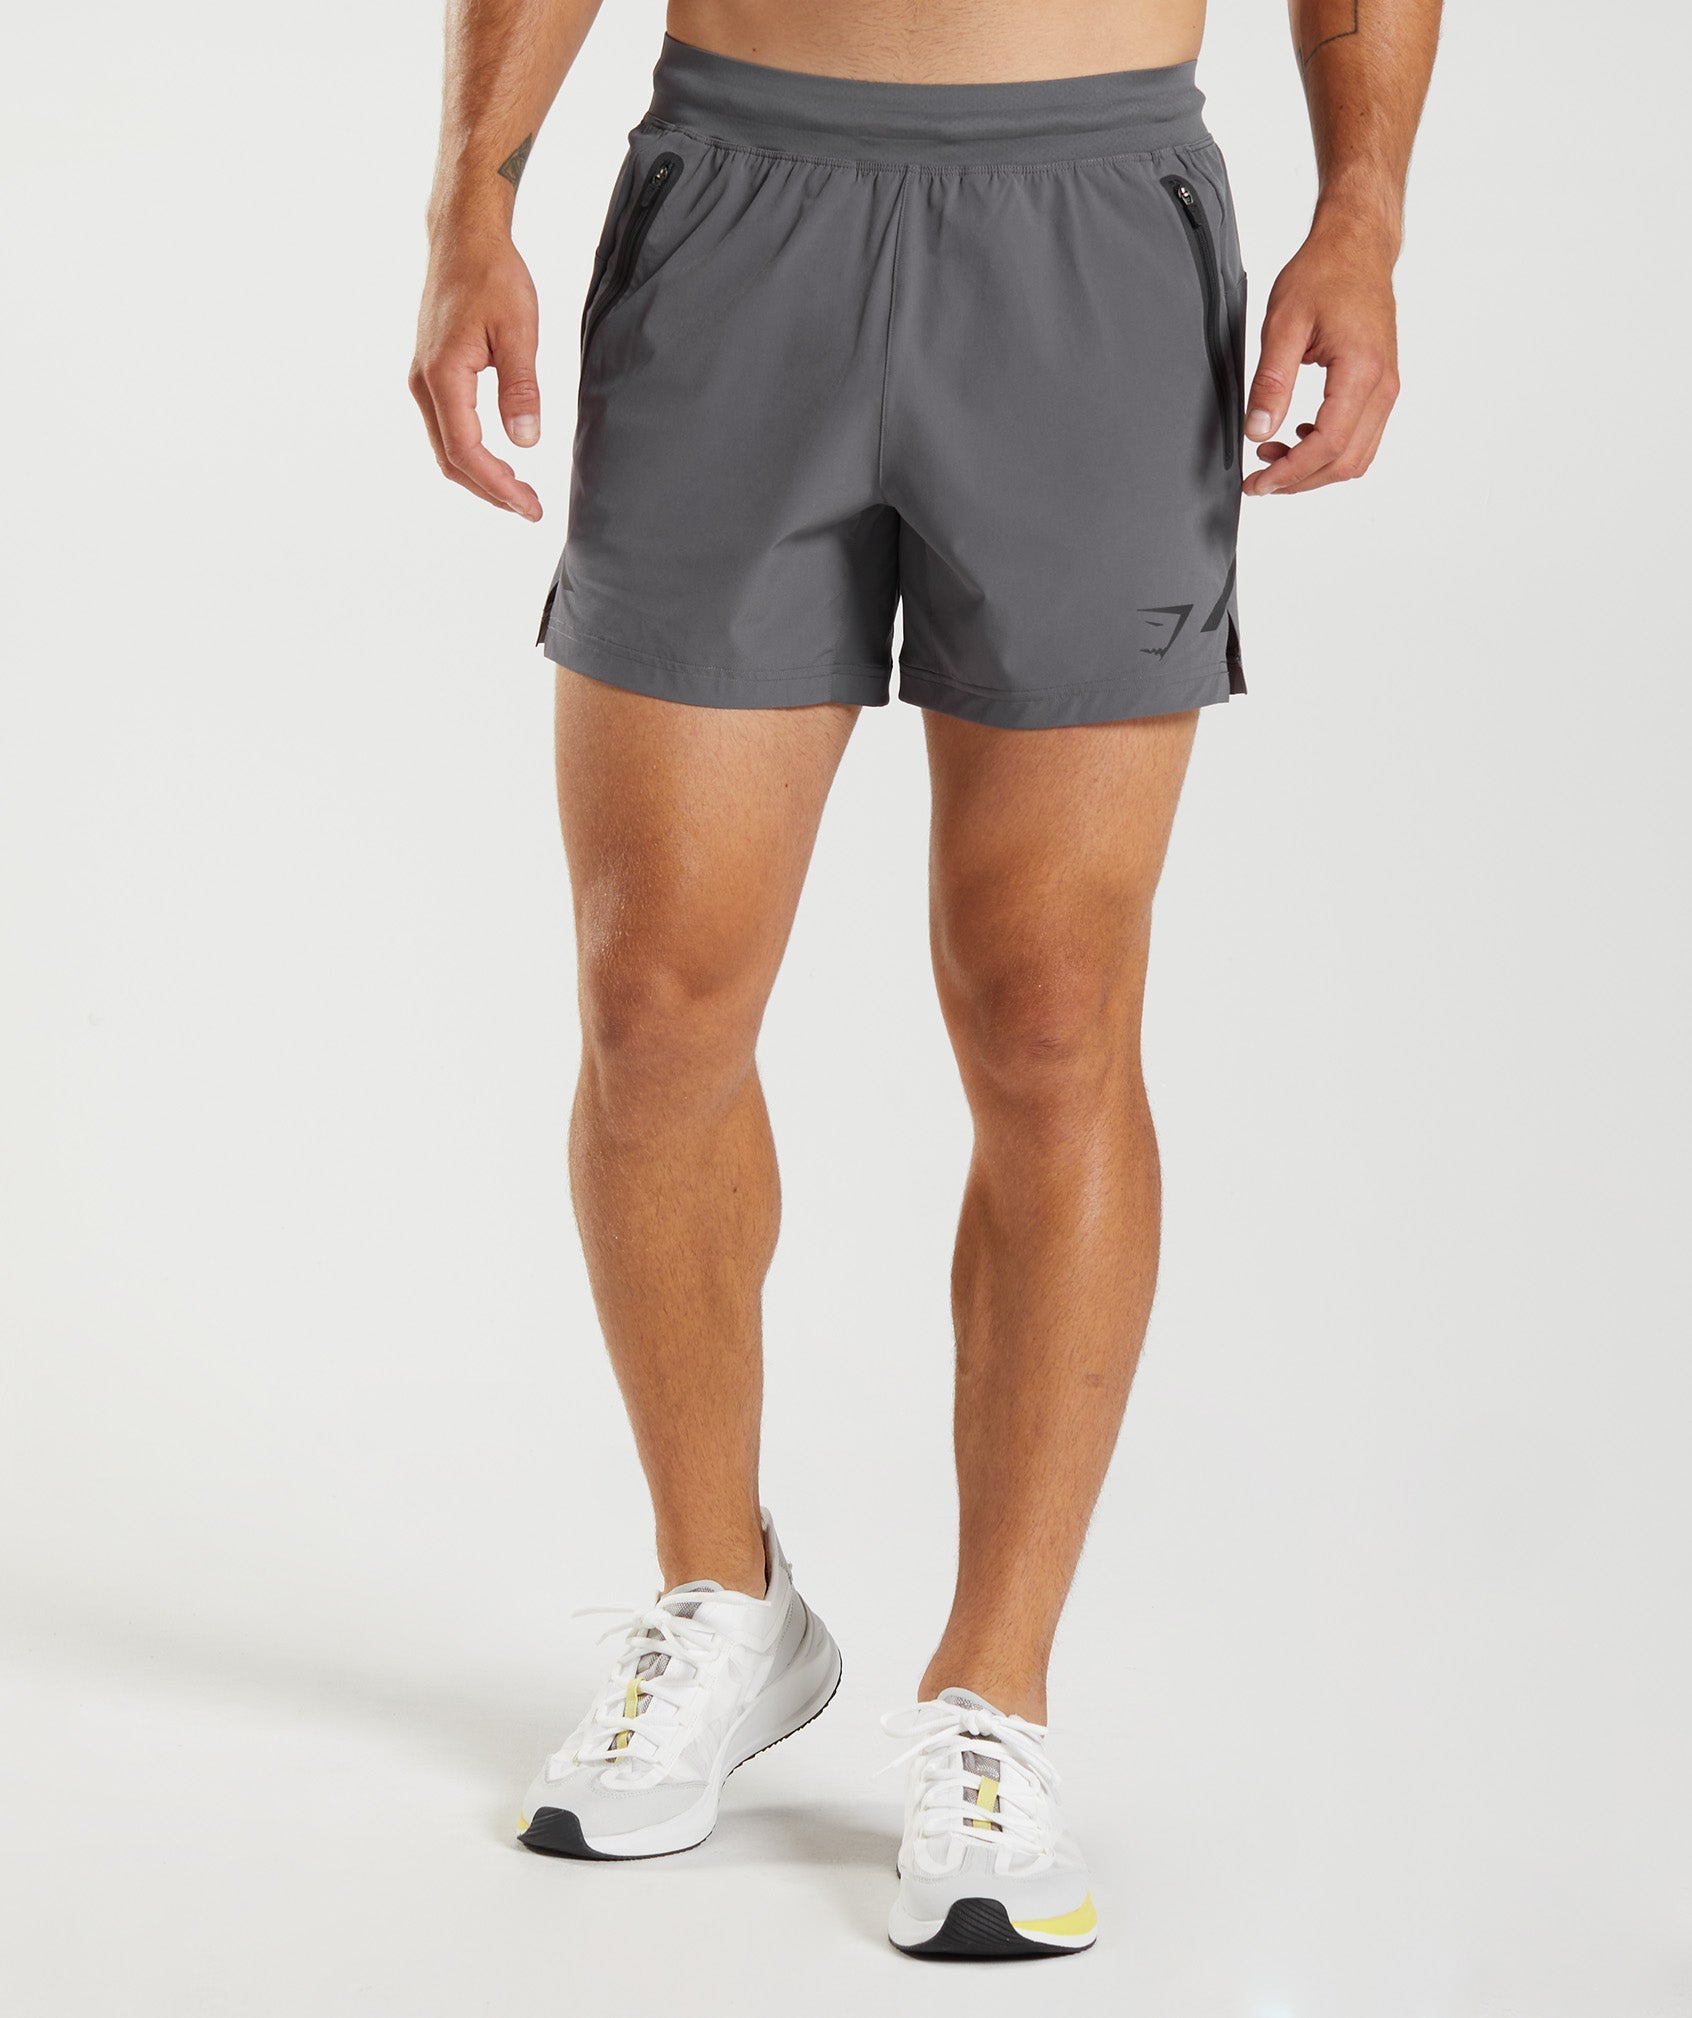 Apex 5" Perform Shorts in {{variantColor} is out of stock